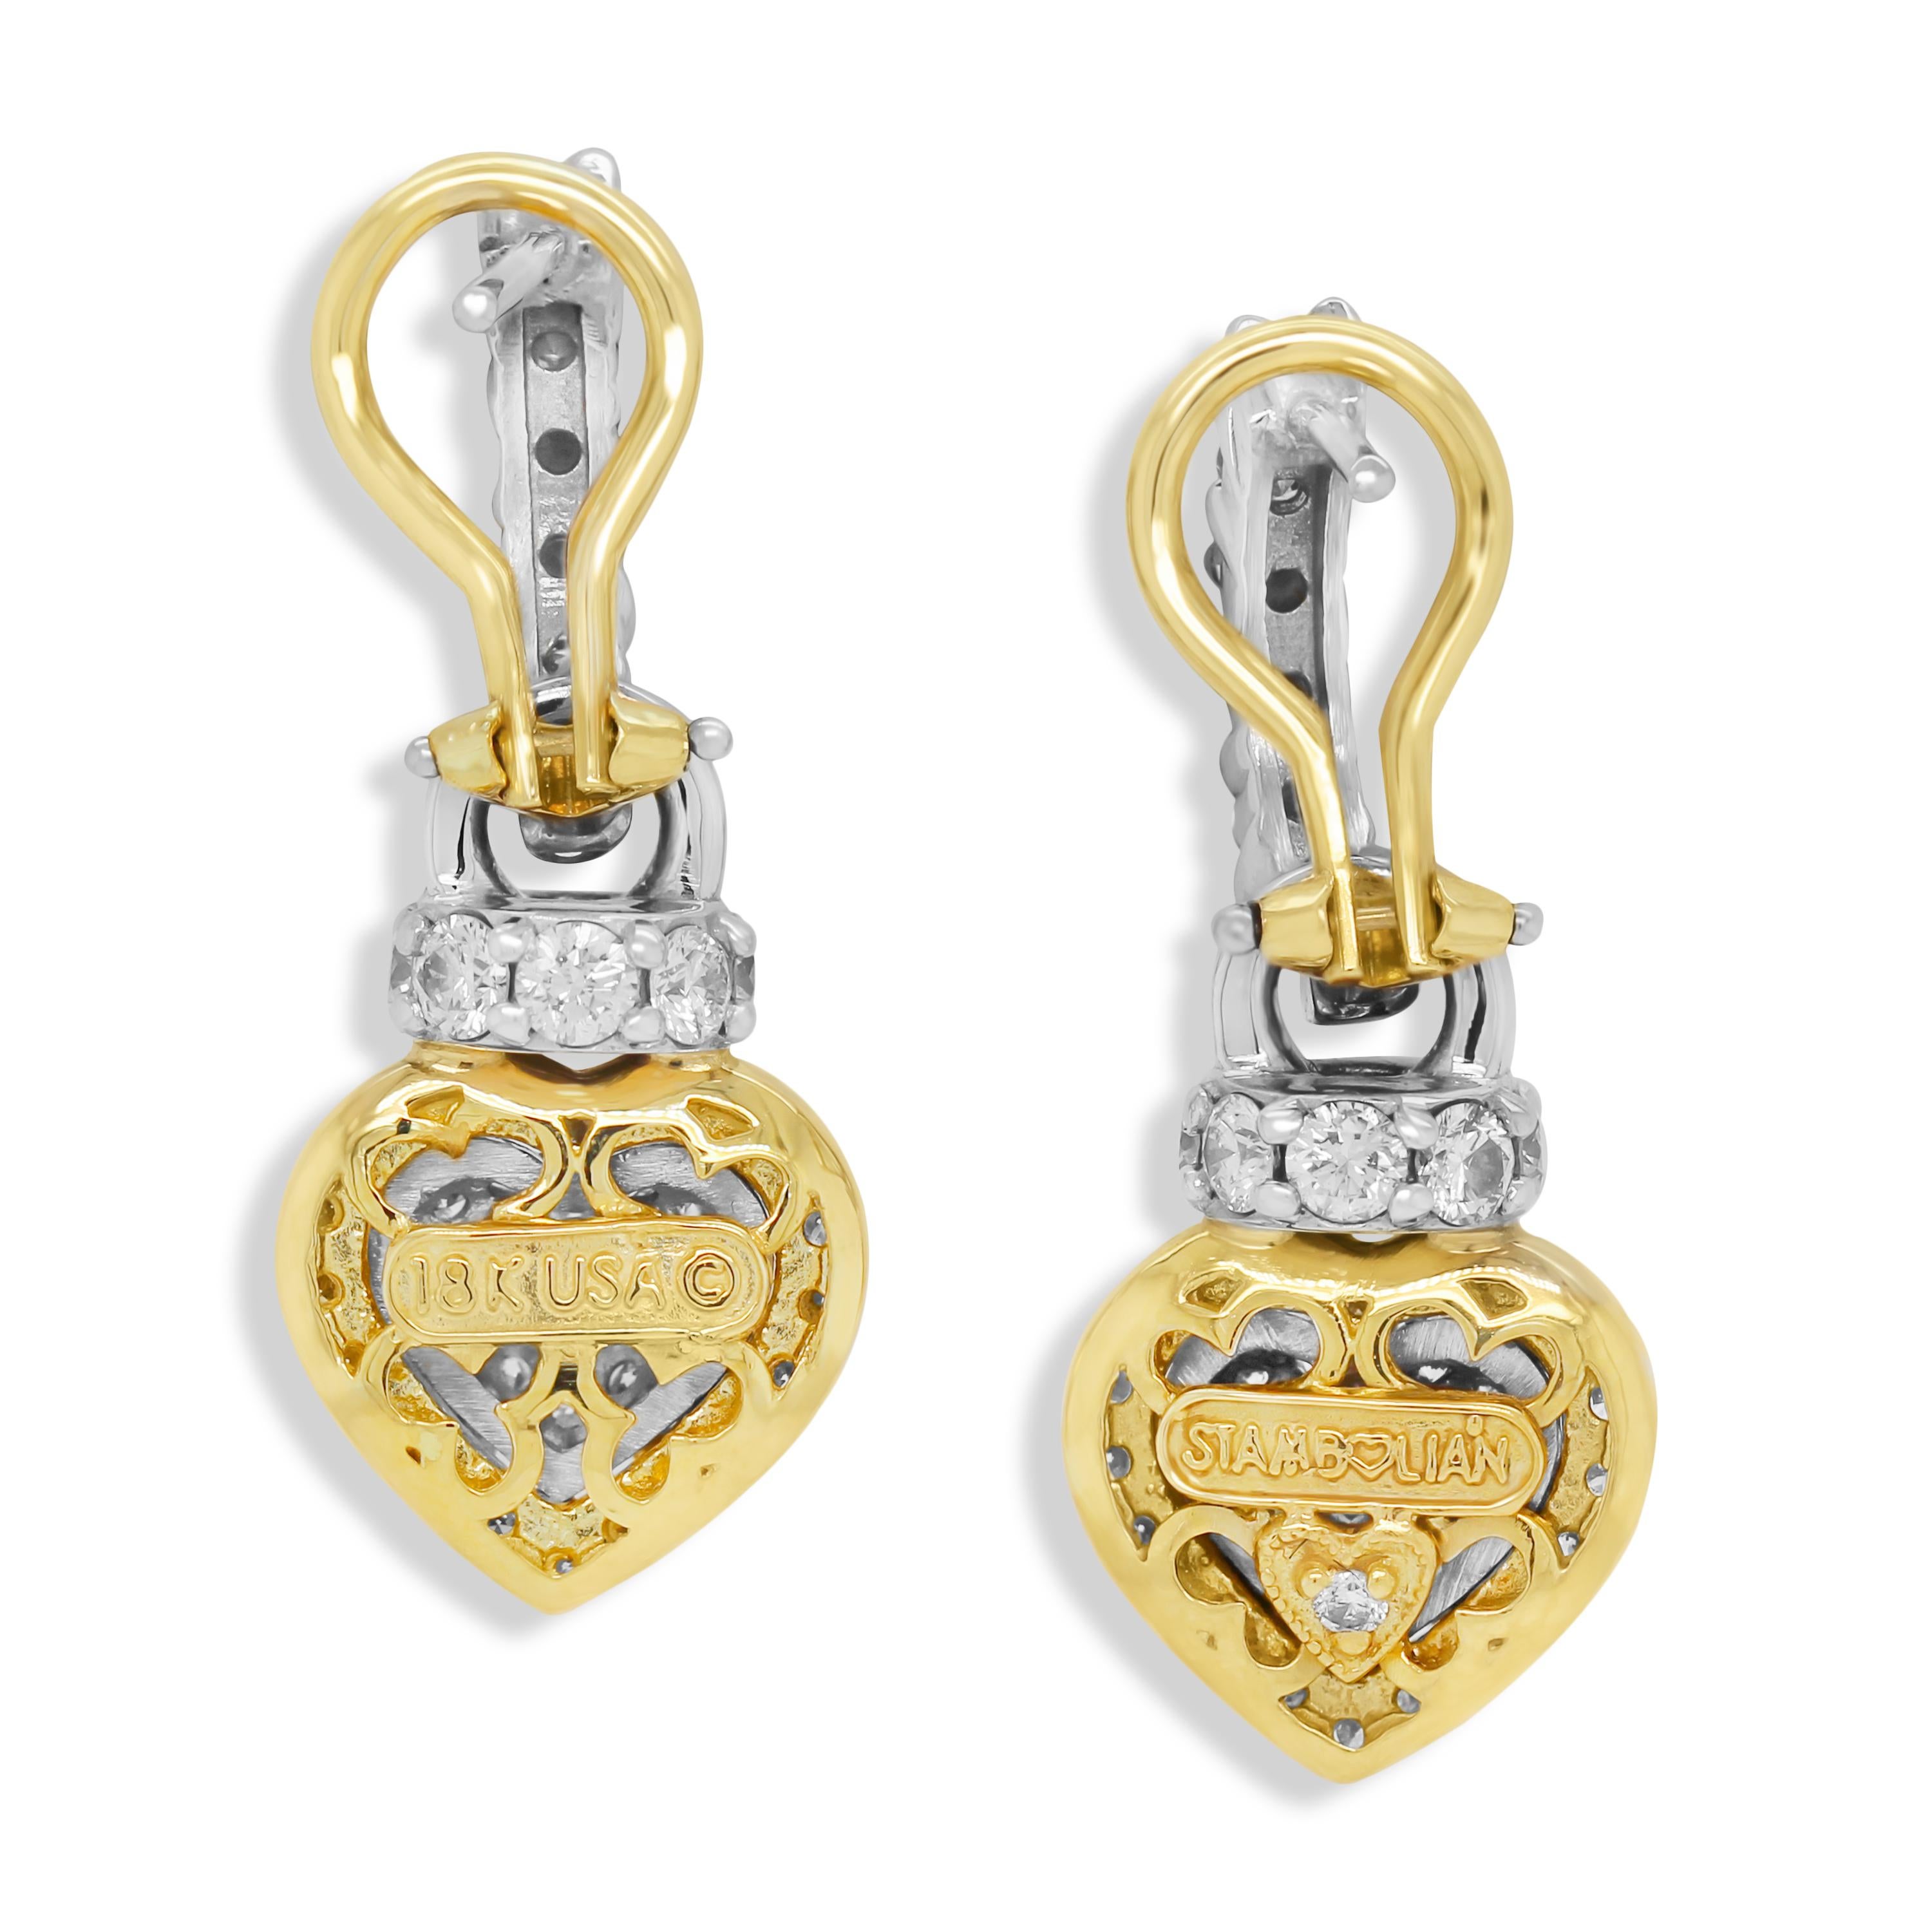 Stambolian 18K Two-Tone Yellow White Gold Diamond Hearts Drop Dangle Earrings

This beautiful pair of earrings features pave set, diamond heart drops with an all diamond top.

2.33 carat G color, VS clarity diamonds total weight

Earrings use